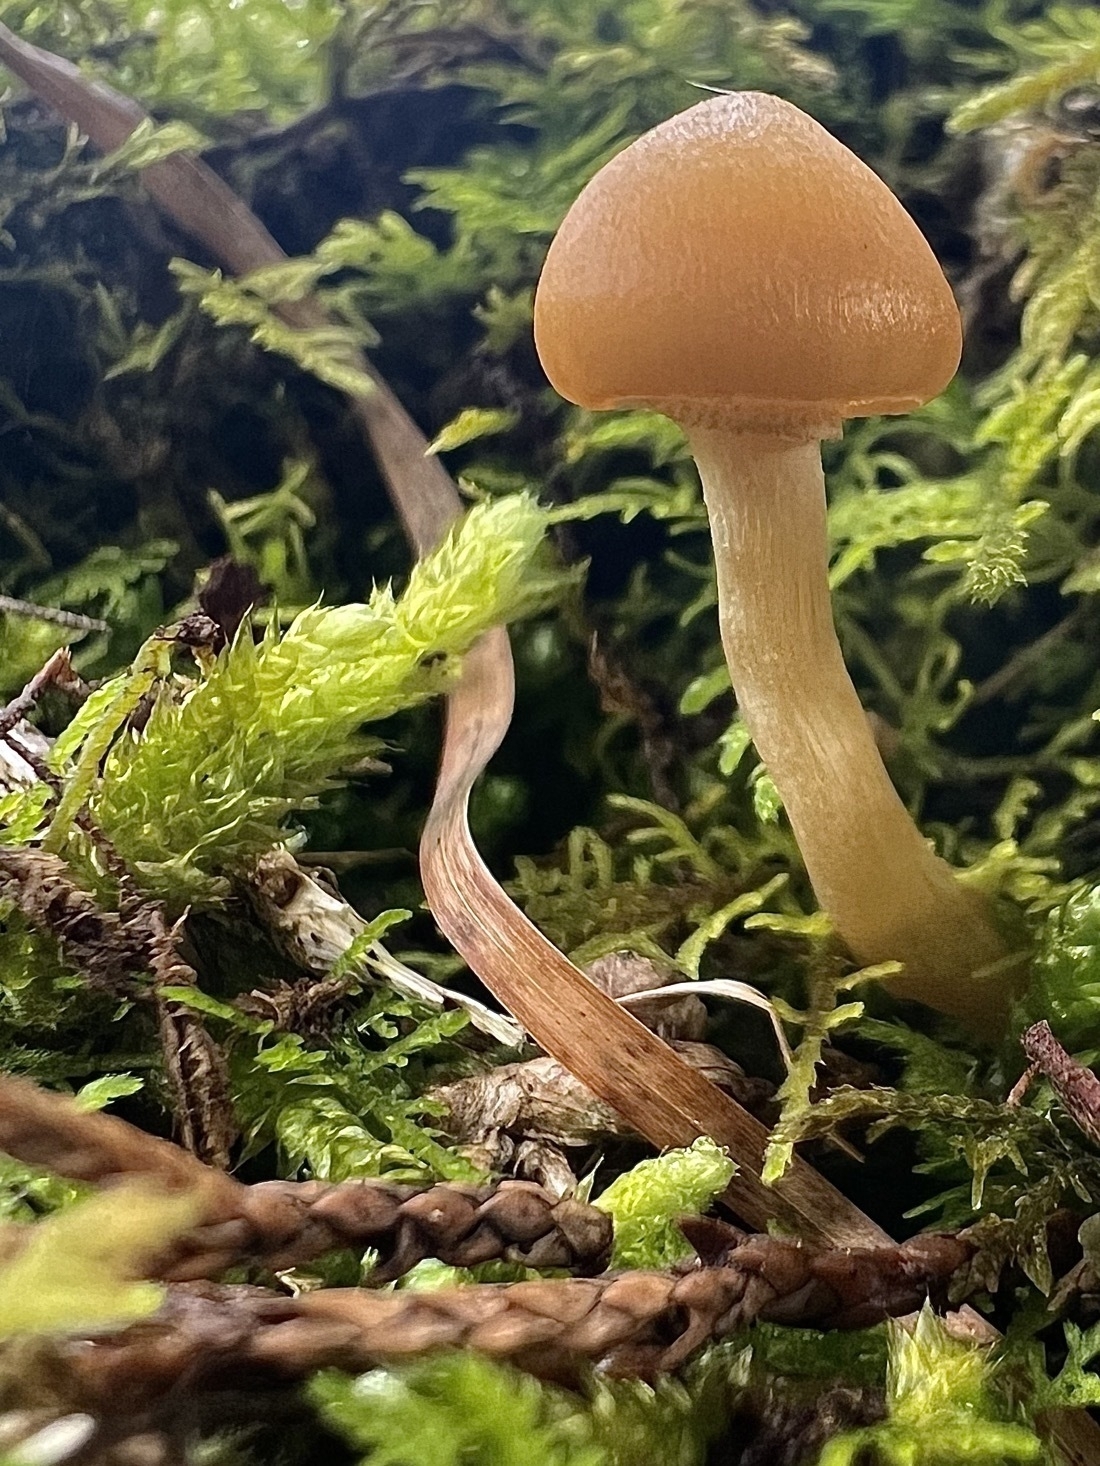 A tiny tan mushroom grows from thick green moss